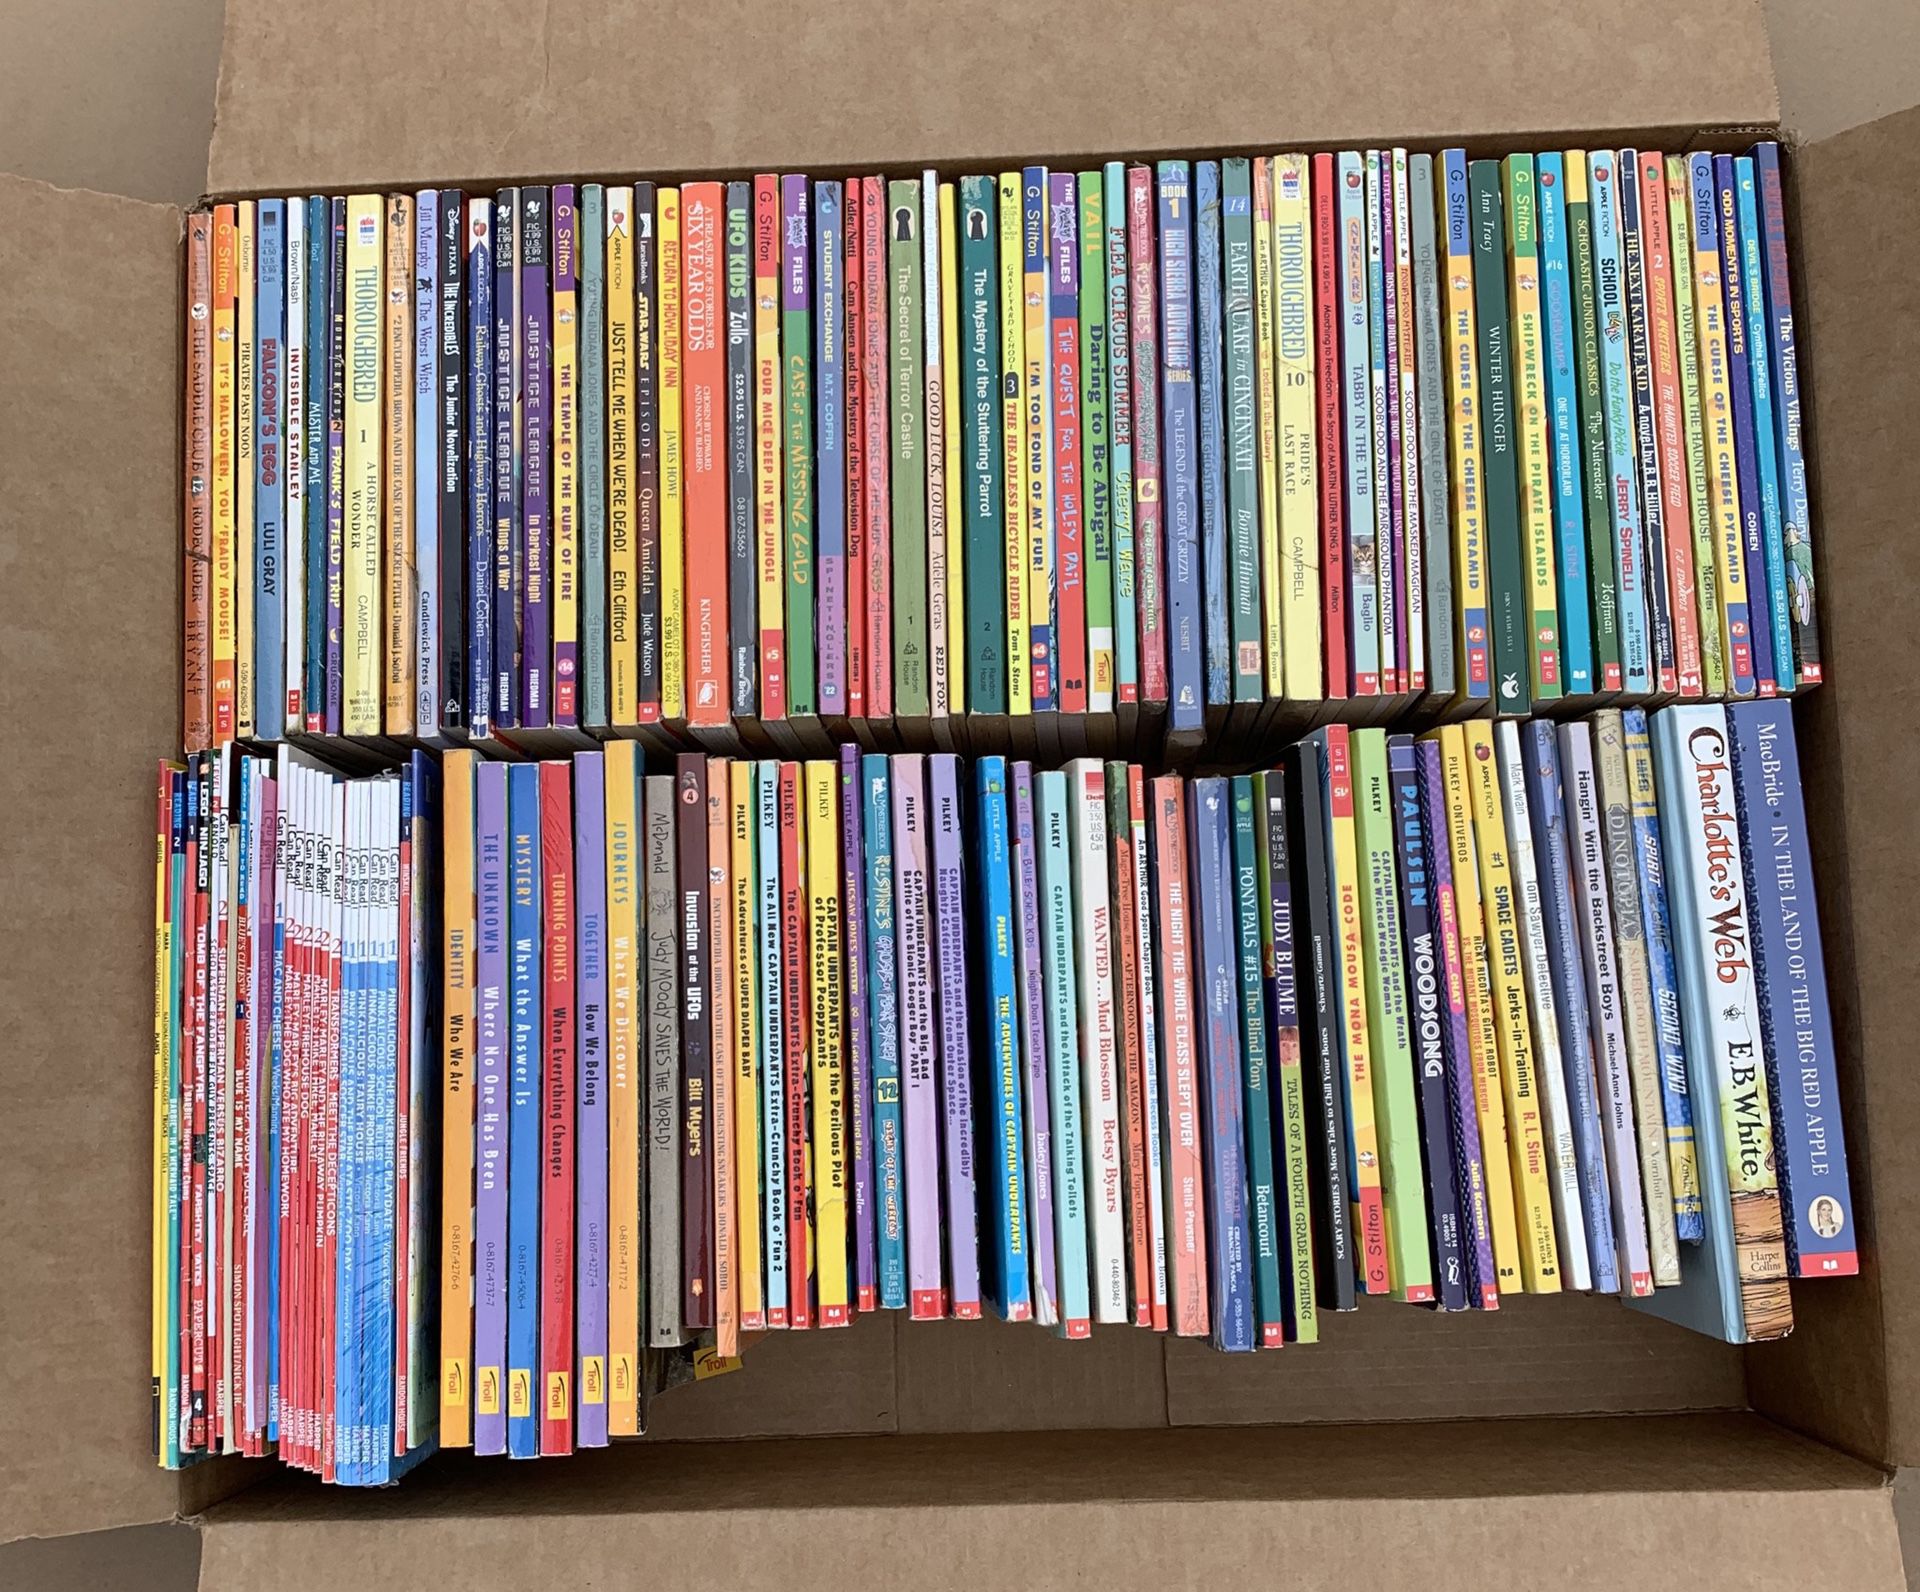 137 Kids books, Bernstein Bears, Geronimo Stilton, Judy Blume, Early Readers, Captain Underpants, and many more